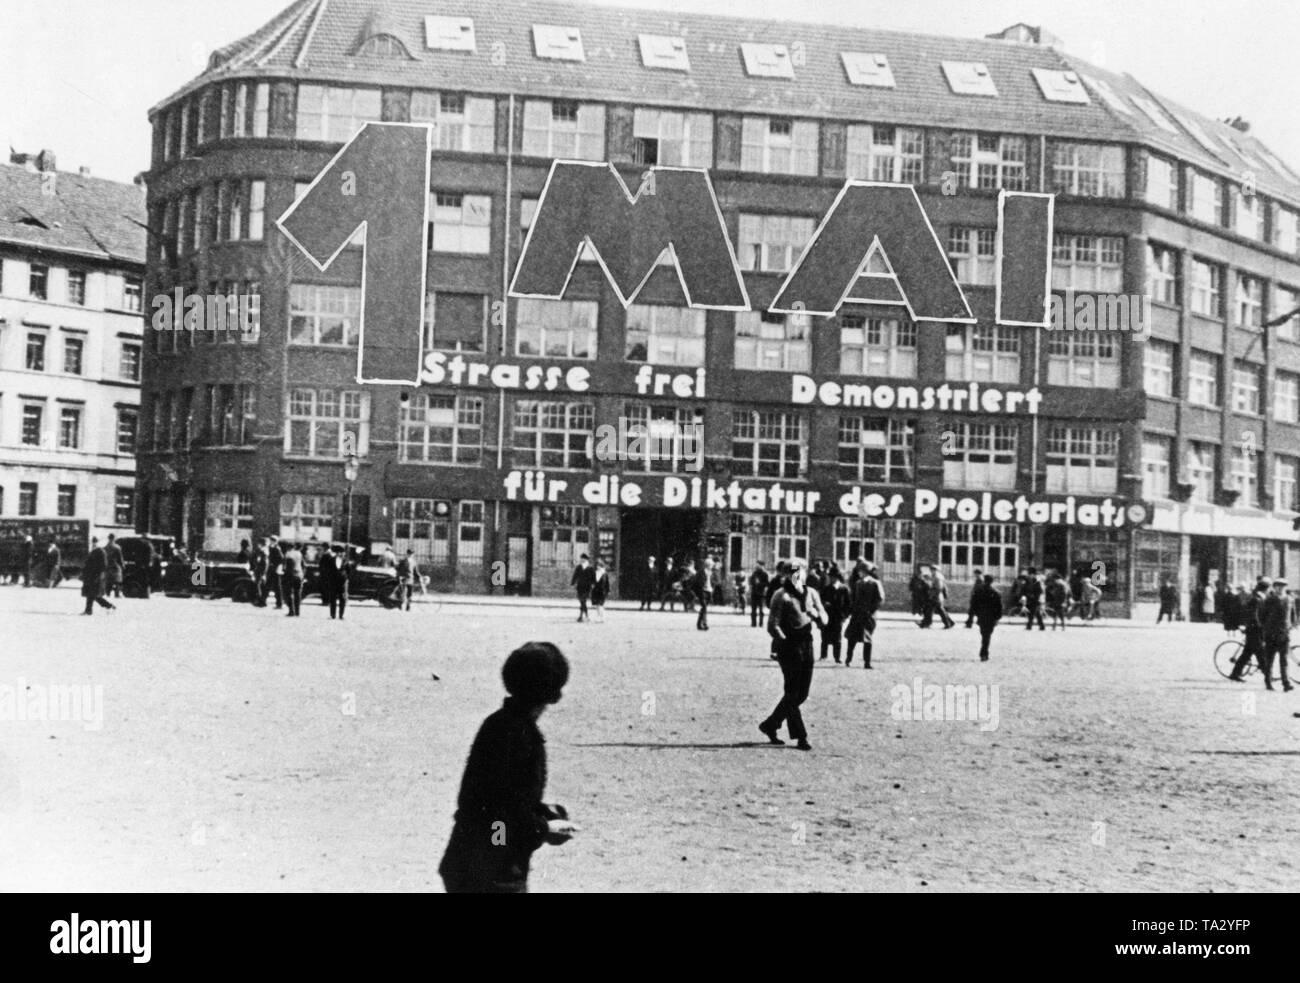 The Karl-Liebknechthaus on 1 May, the beginning of the so-called 'Blutmai' ('Bloody May'), which lasted from 1 to 3 May, 1929. The house served as the party headquarters of the KPD and the editorial office of the Red Flag. Since 1928, open-air political meetings were forbidden, but the KPD called for strikes and demonstrations. In the wake of the May riots, a total of 20 people were killed and 200 injured by the police. Stock Photo